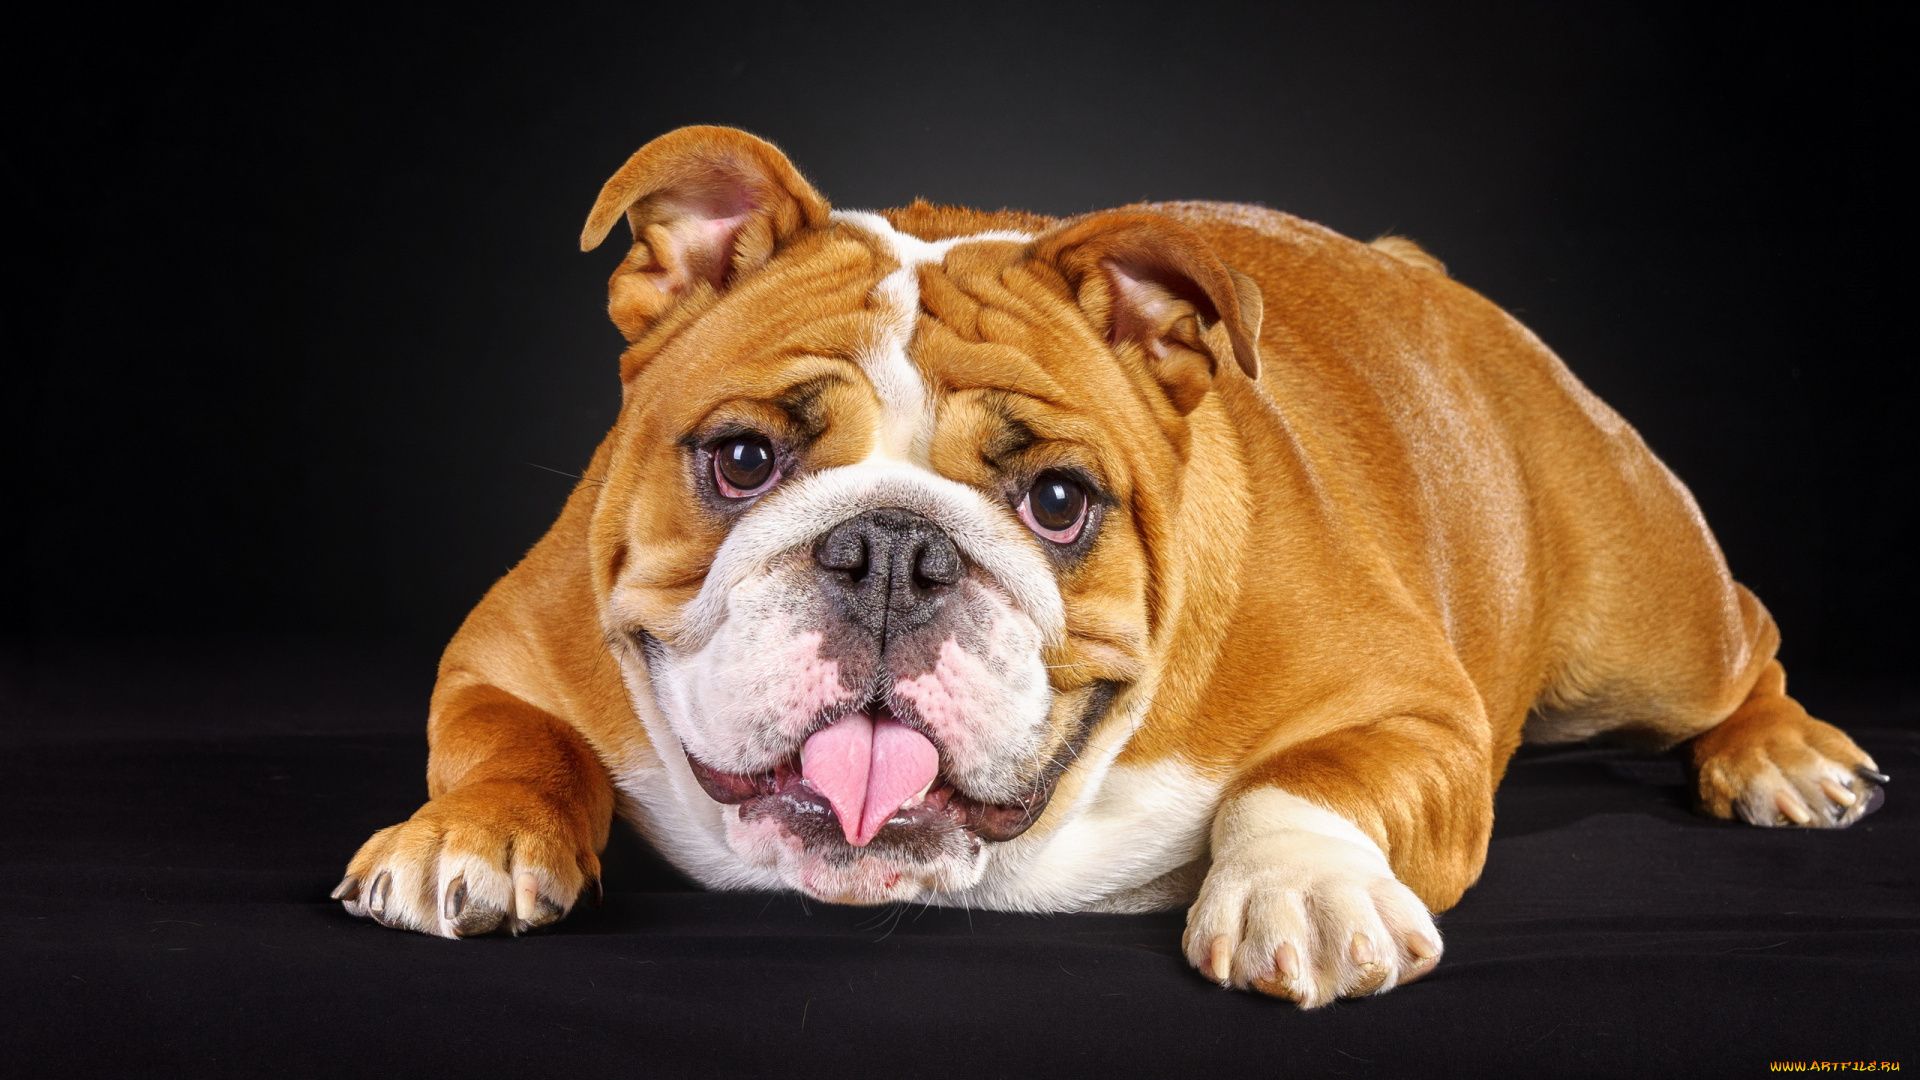 Pictures Of A Bulldog Dog